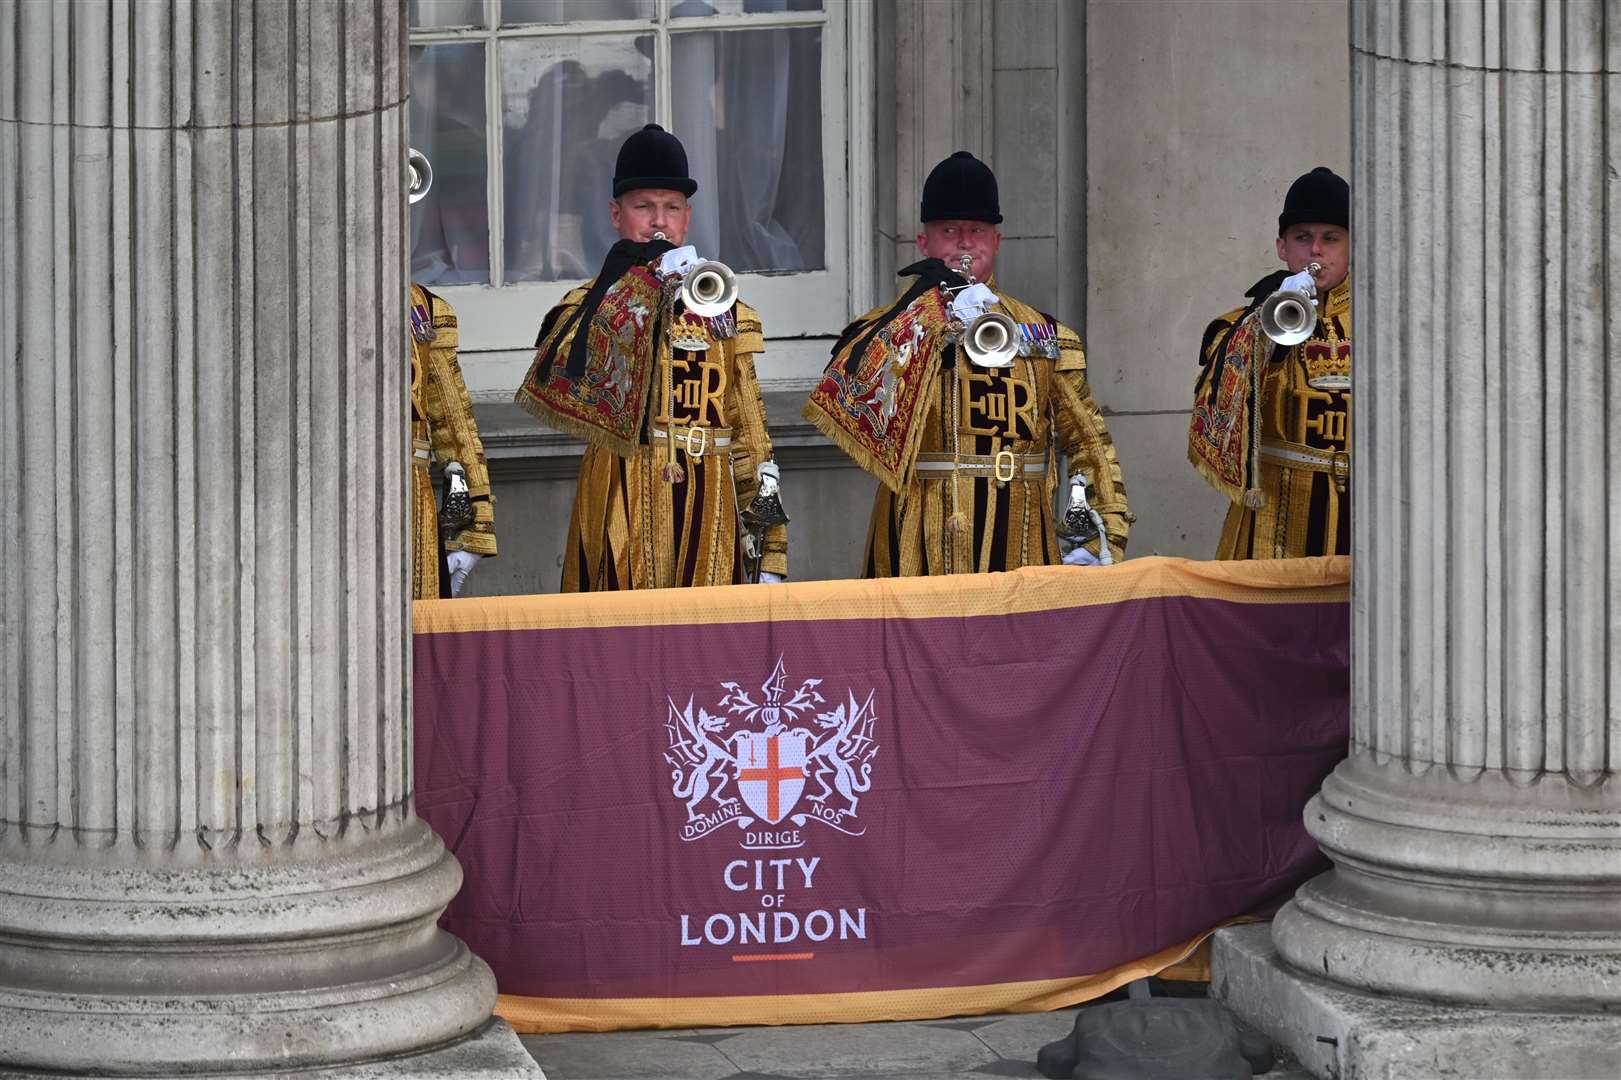 Trumpeters sound a Royal Salute during the Proclamation of Accession of King Charles III at the Royal Exchange (Leon Neal/PA)